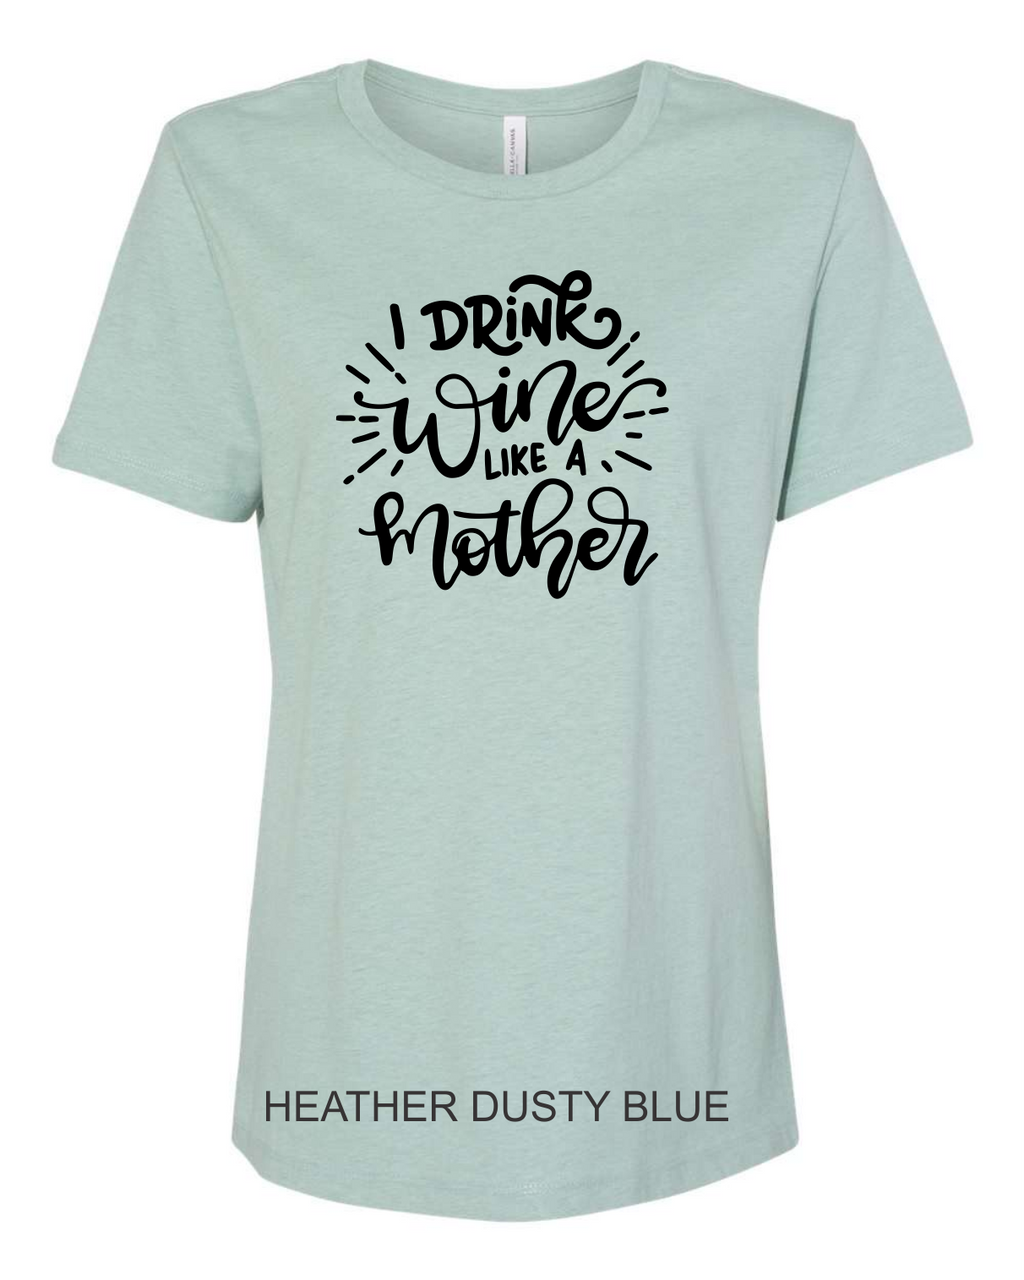 I drink wine like a Mother (soft t)